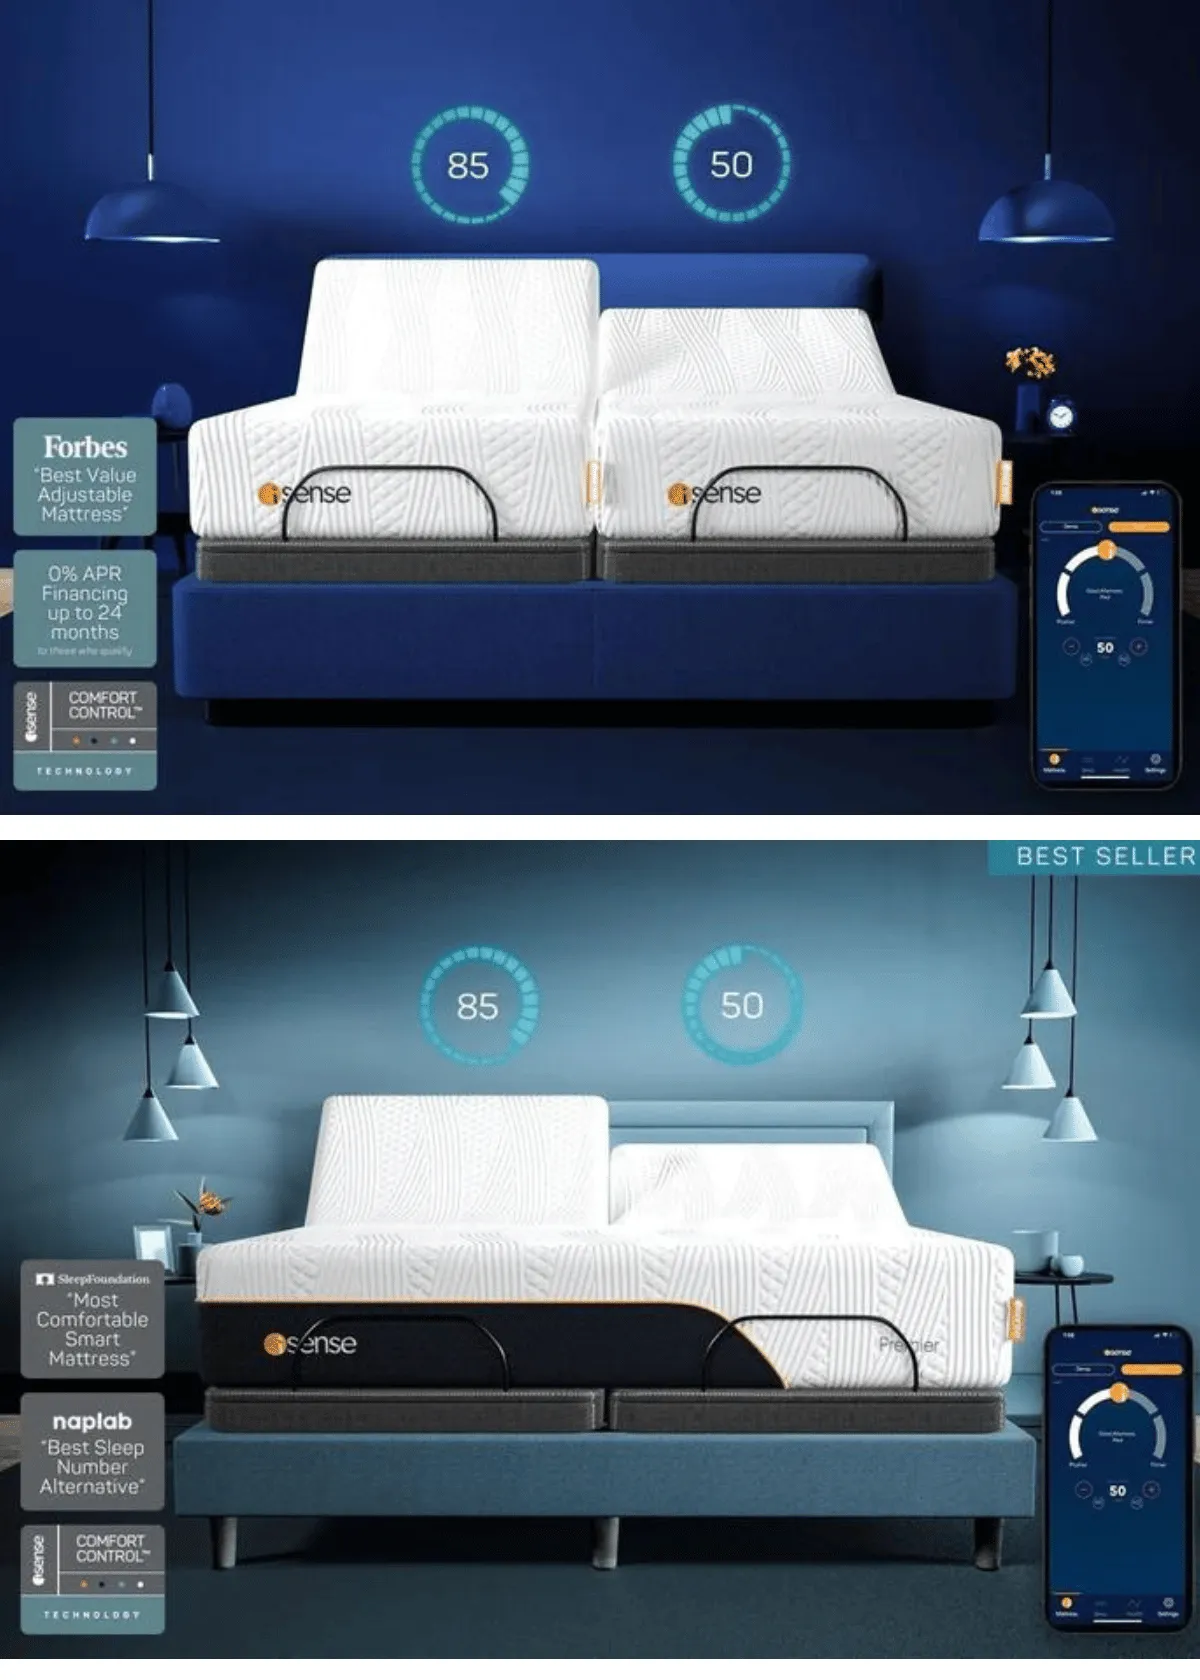 "Is the iSense Mattress the Best Adjustable Firmness for Couples?"